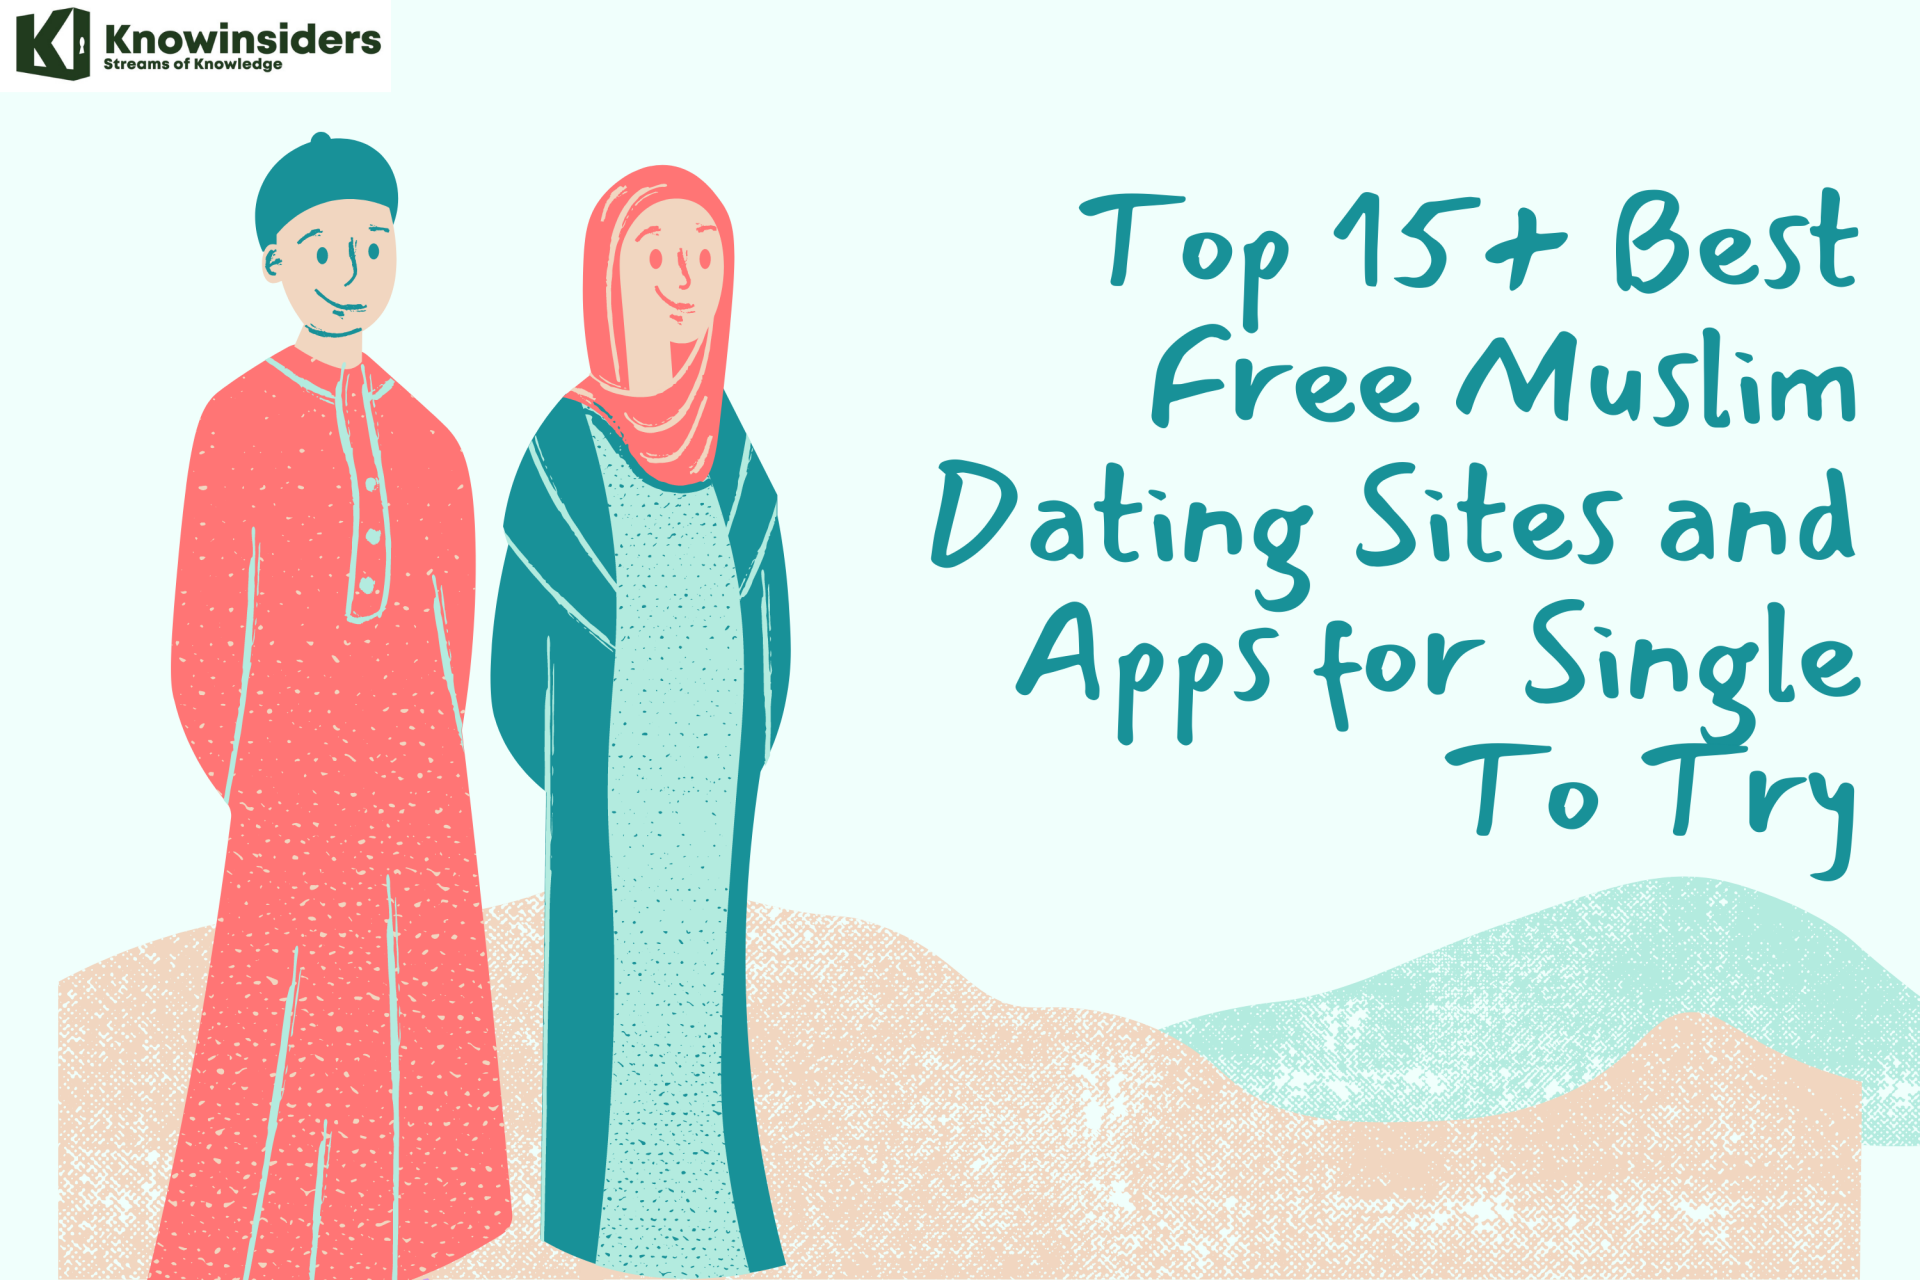 Top 15+ Best Free Muslim Dating Sites & Apps for Single To Try